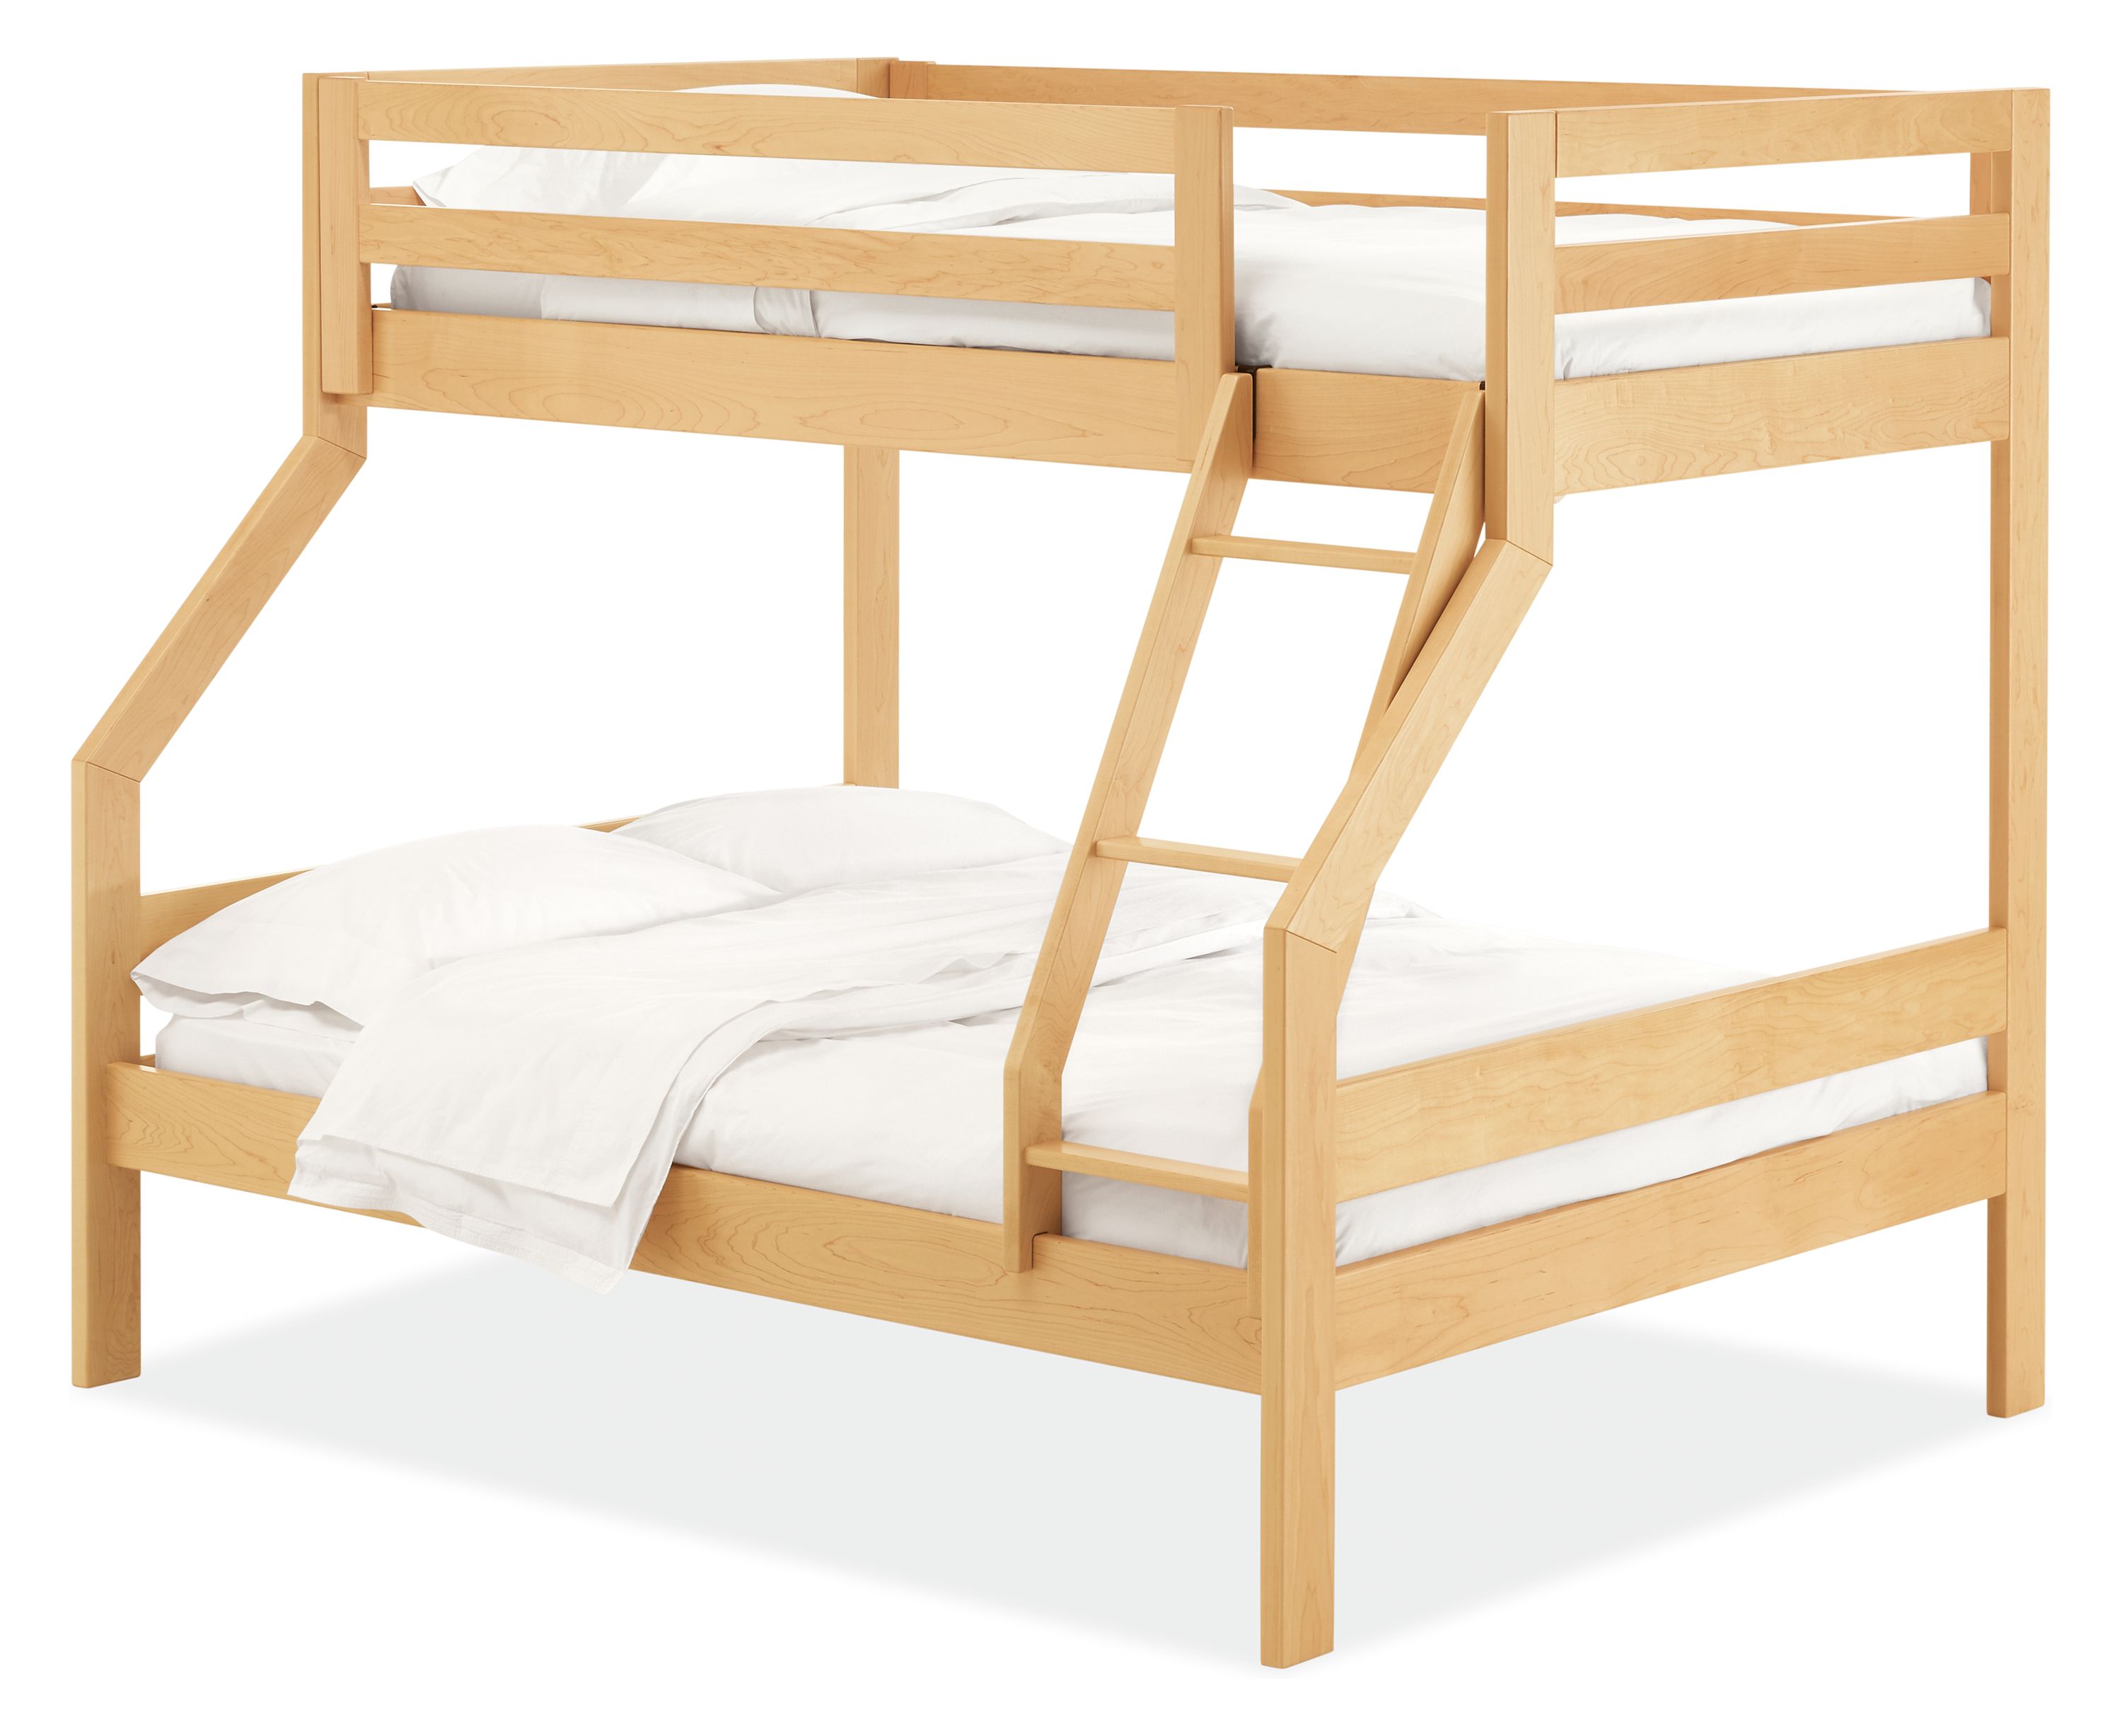 Waverly Bunk Bed Twin Over Full, Full Size Bed With Bunk